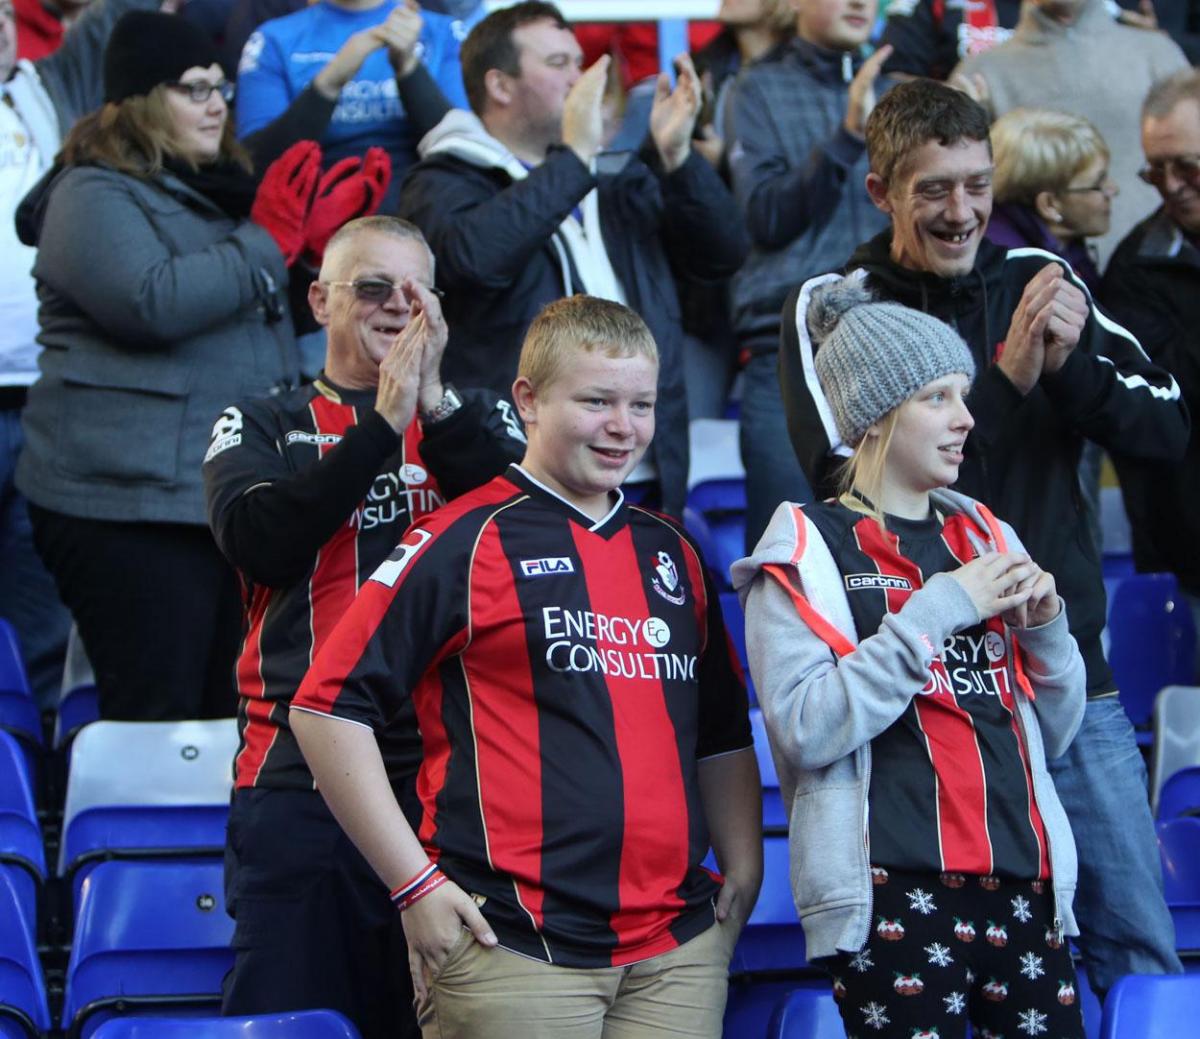 All the fans photos from the Cherries matches in October 2014